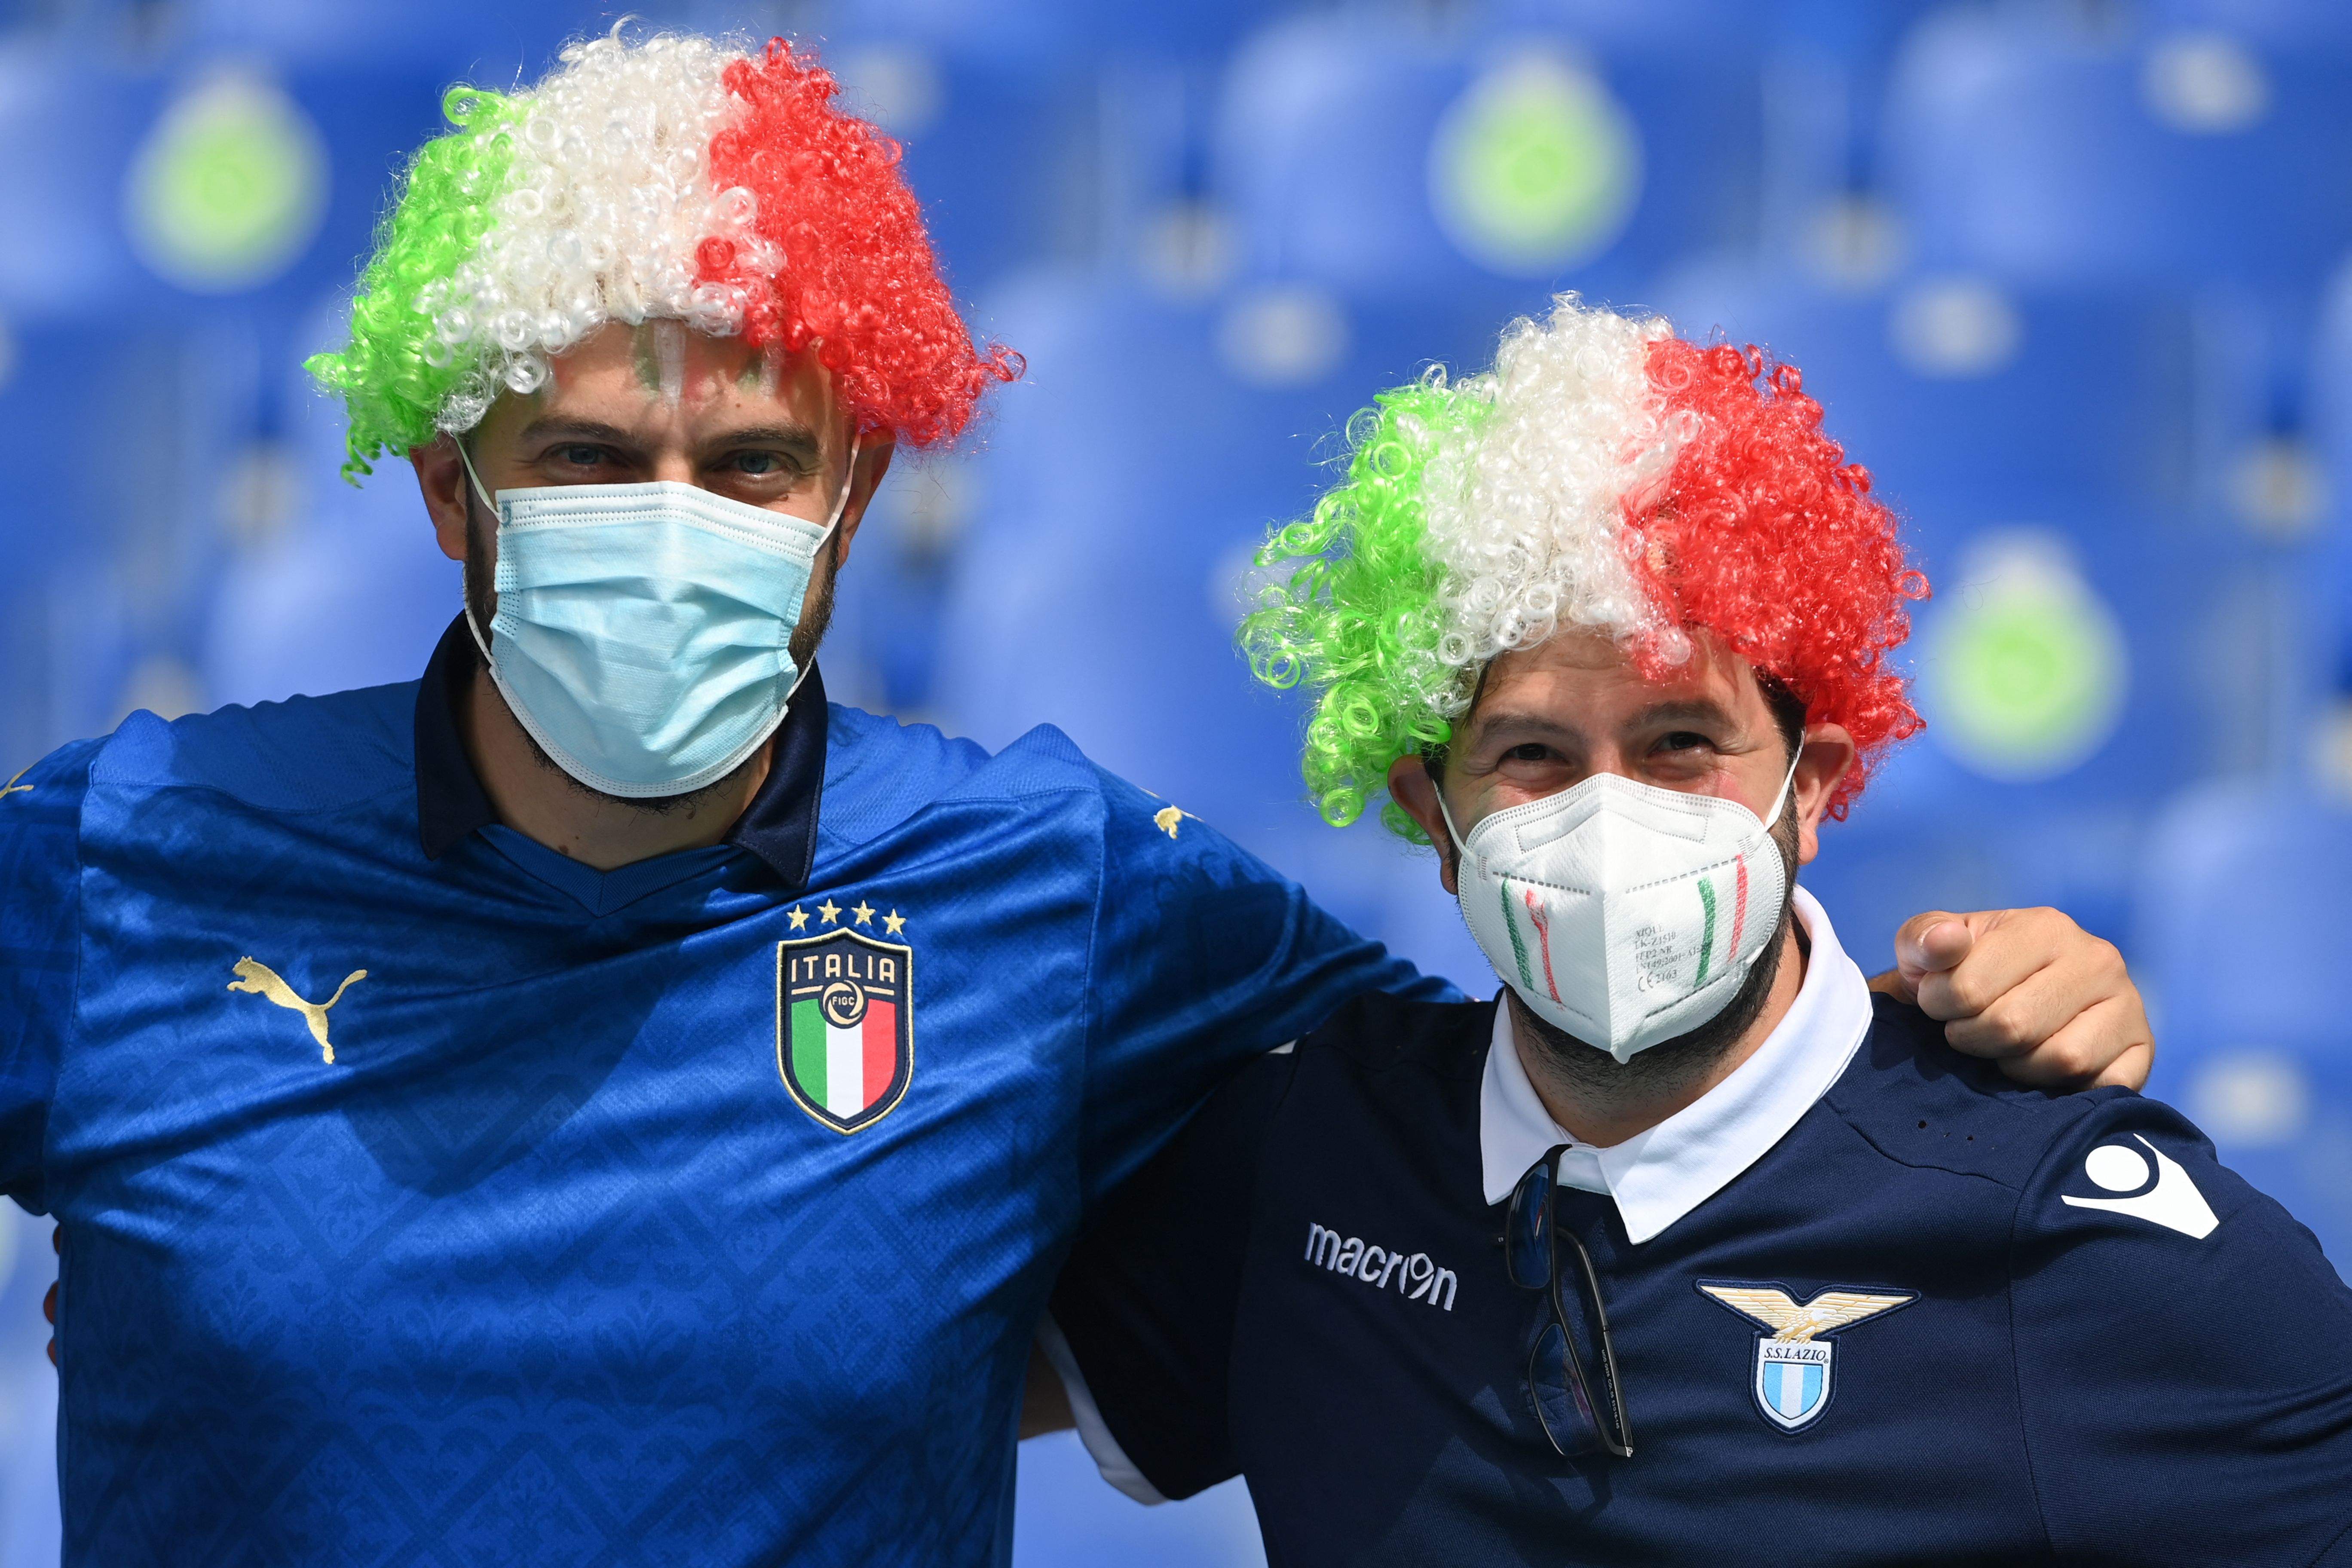 Italy fans pose with masks as a precaution against the transmission of the new coronavirus before the UEFA EURO 2020 Group A soccer match between Italy and Wales at the Olympic Stadium in Rome on June 20, 2021